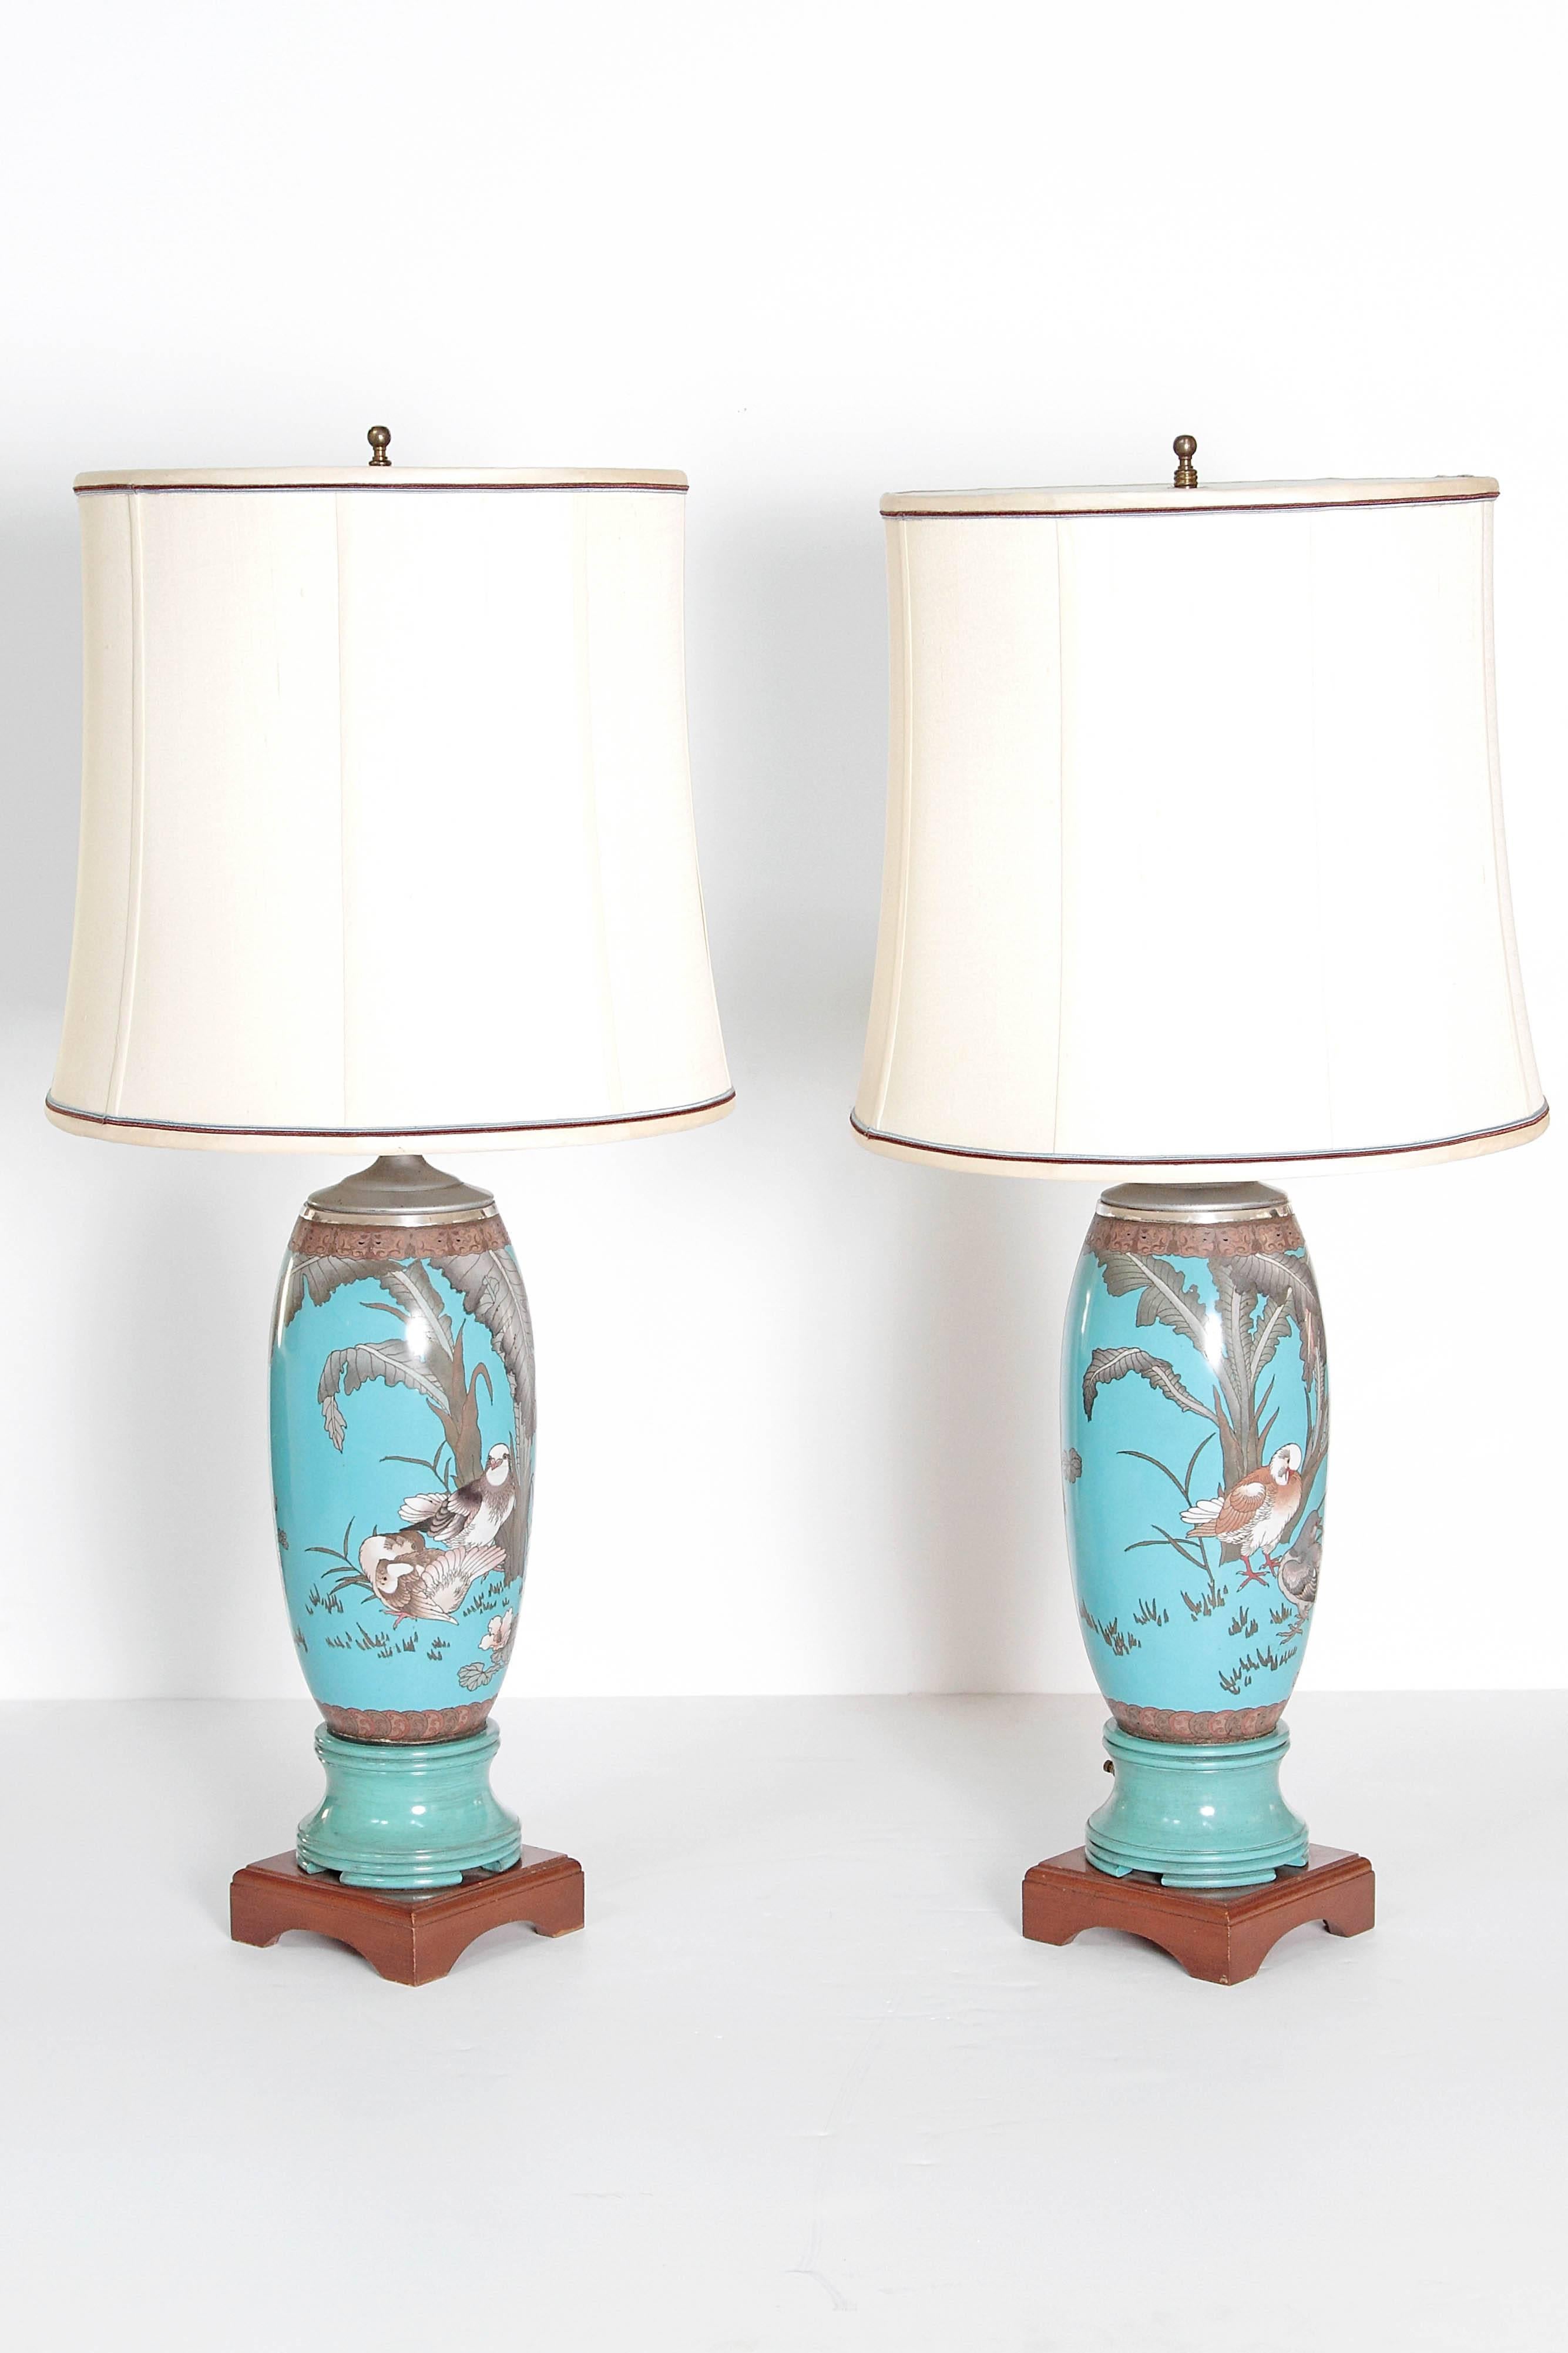 Aesthetic Movement Pair 19th Century of French Cloisonne Lamps